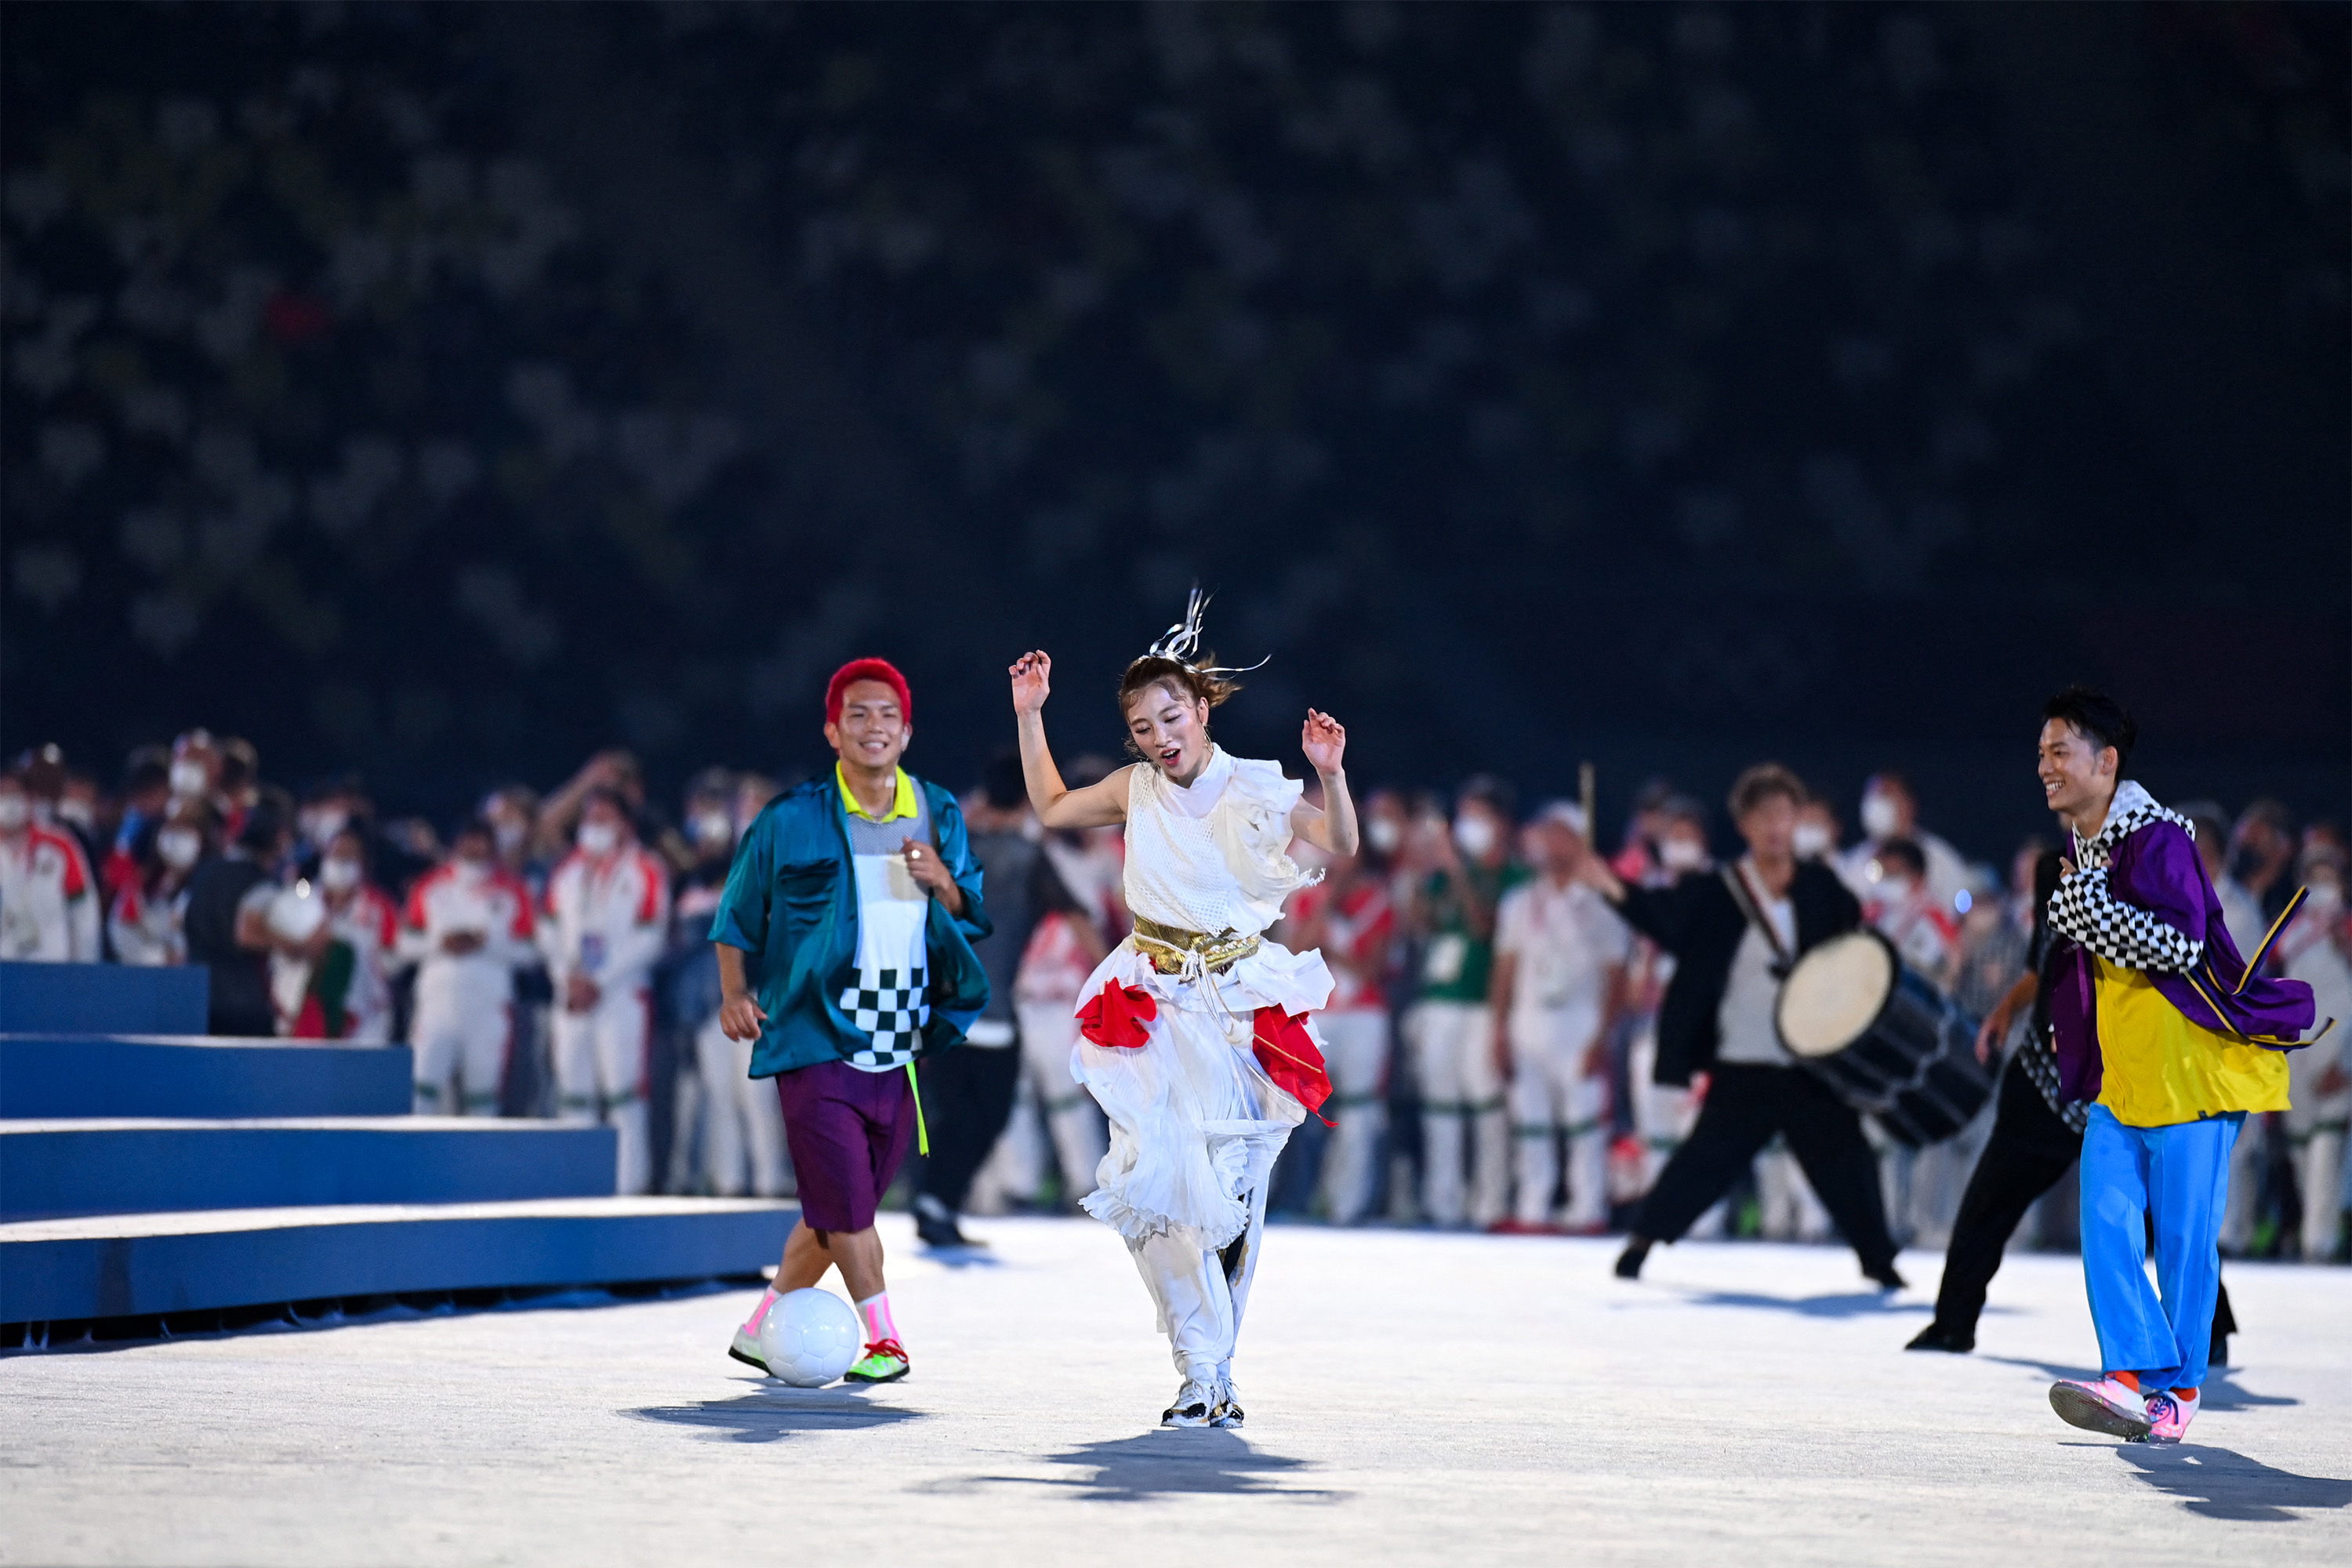 Dancers and musicians perform during the closing ceremony of the Tokyo 2020 Olympic Games, at the Olympic Stadium, in Tokyo, on August 8, 2021. (Photo by Daniel LEAL-OLIVAS / AFP)